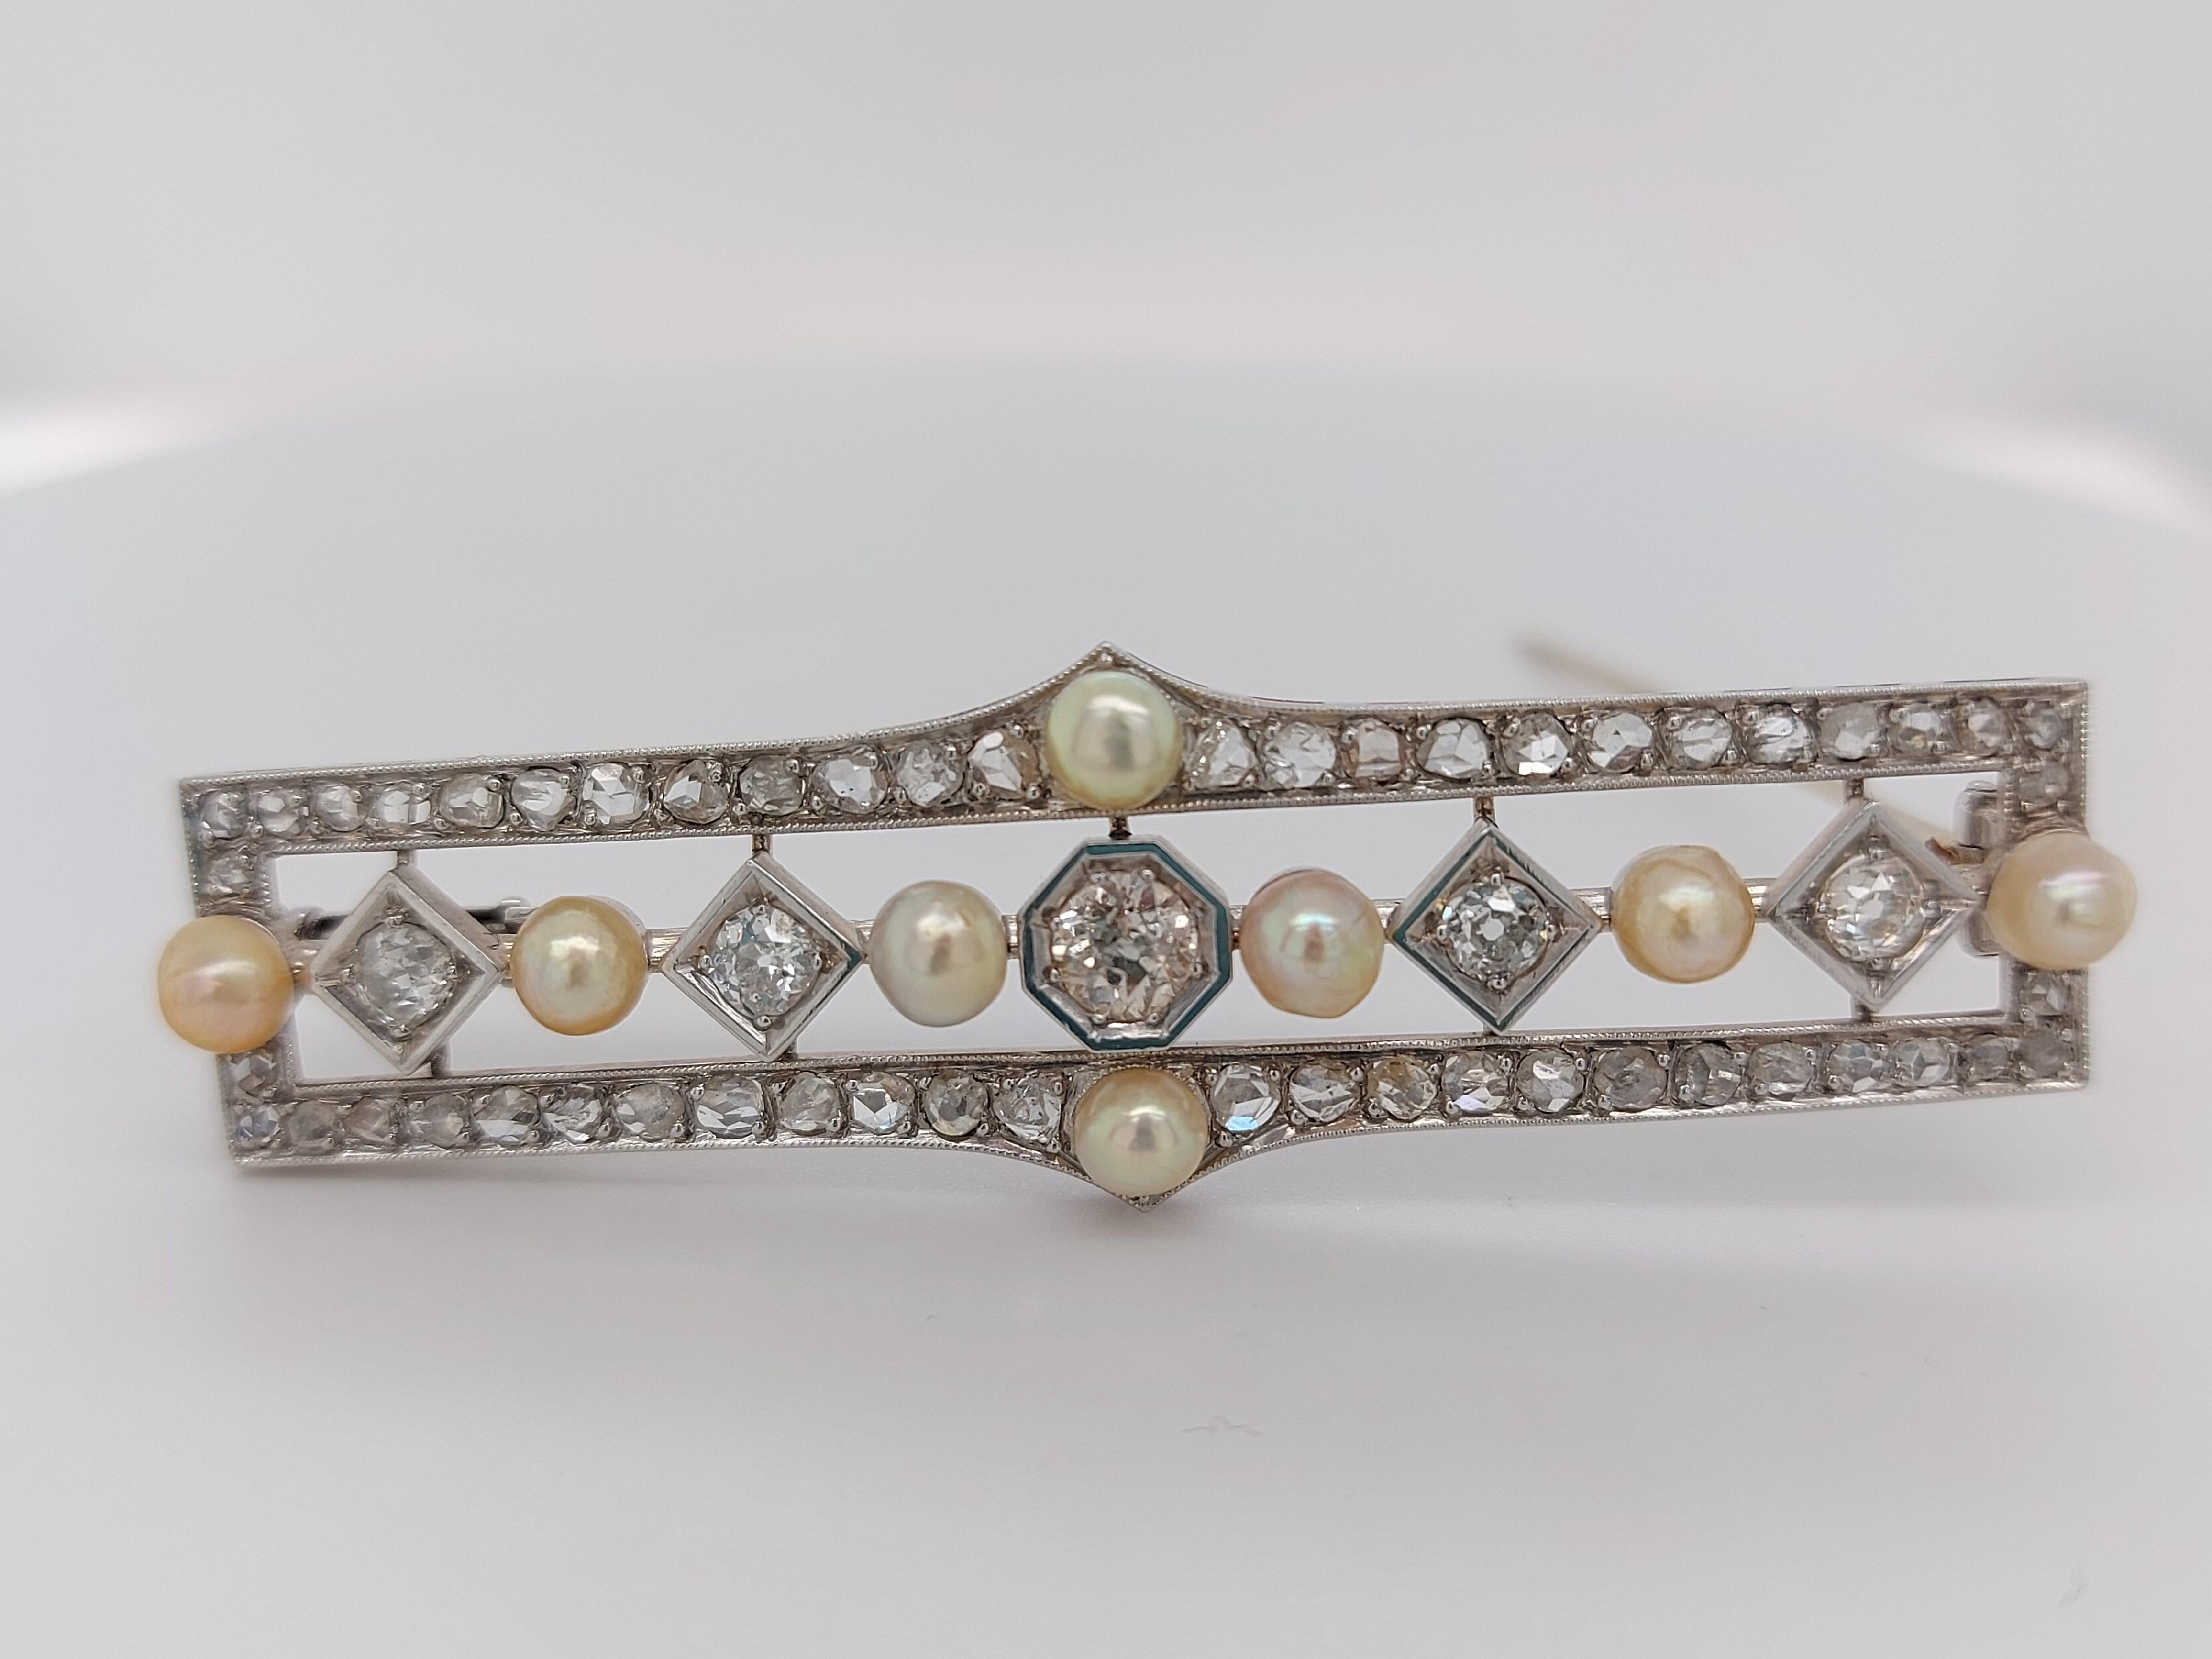 Platinum Handmade Bar Brooch with Diamond and Pearls For Sale 4